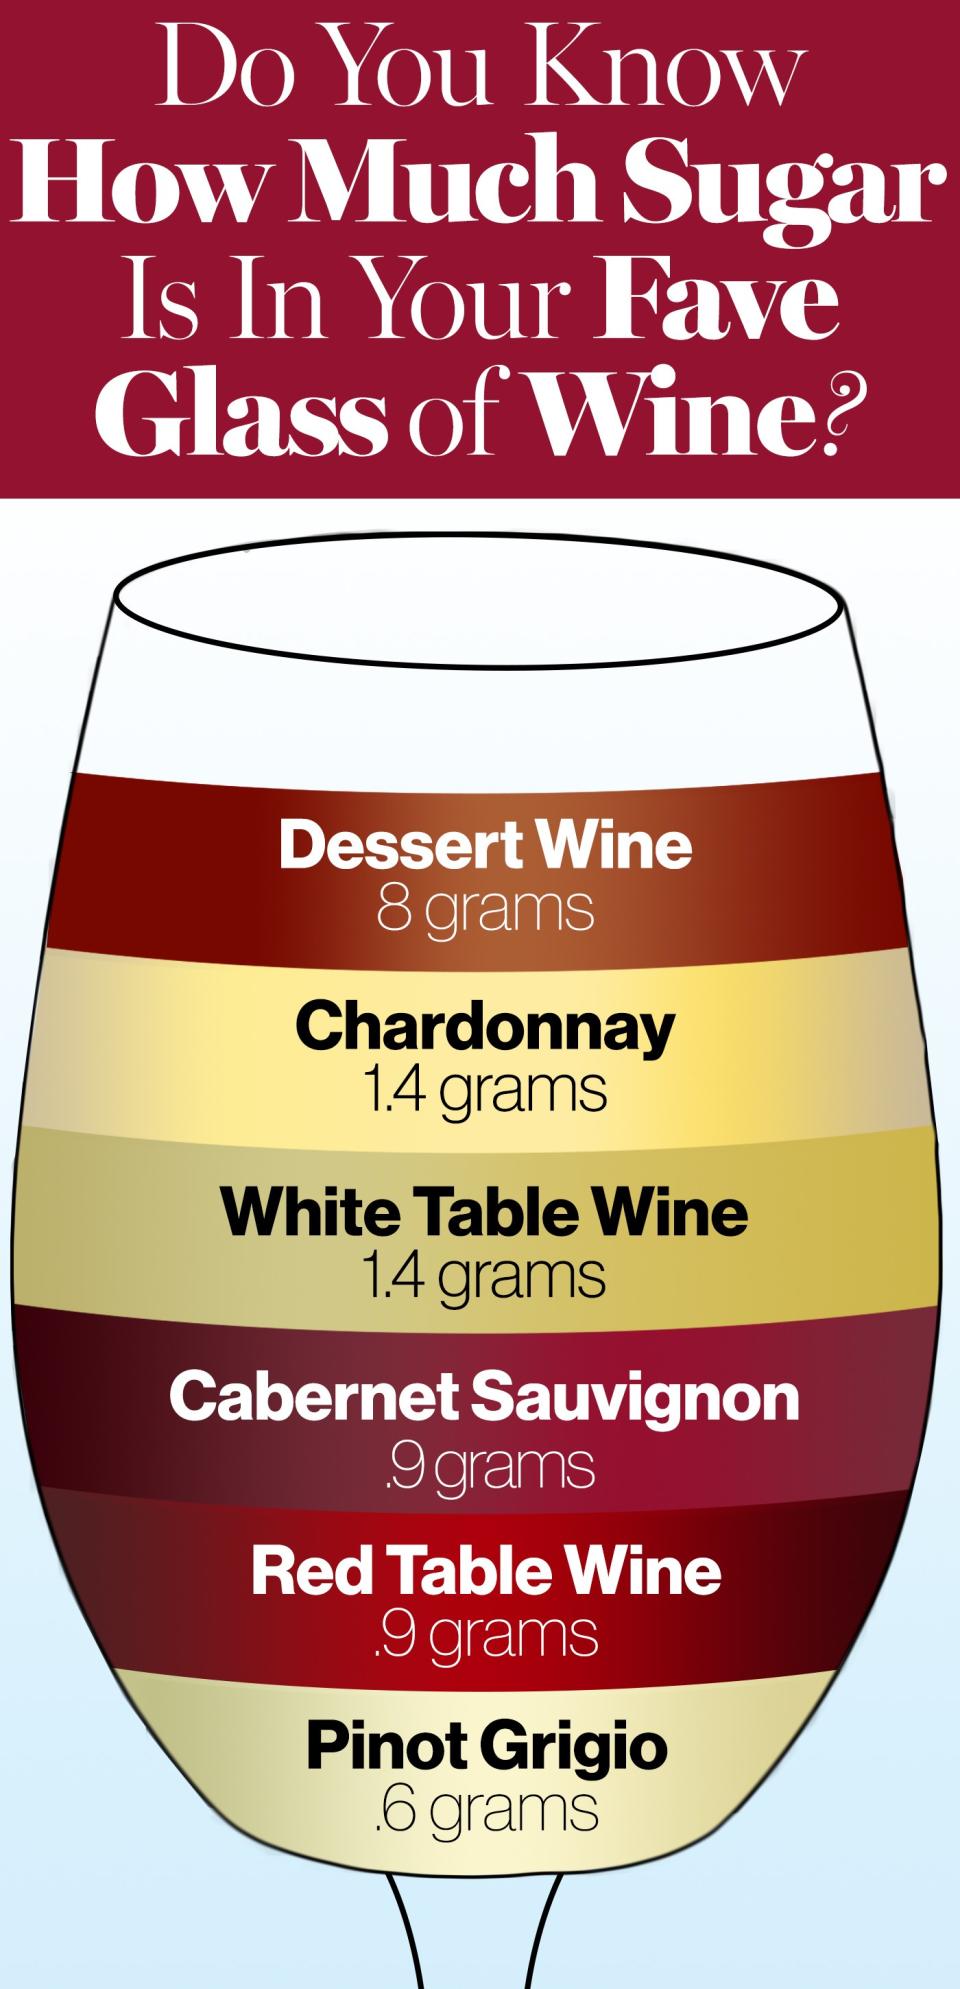 You've probably heard at some point that wine contains sugar, but experts say it's probably less than you'd think. Here's how much sugar is in wine.